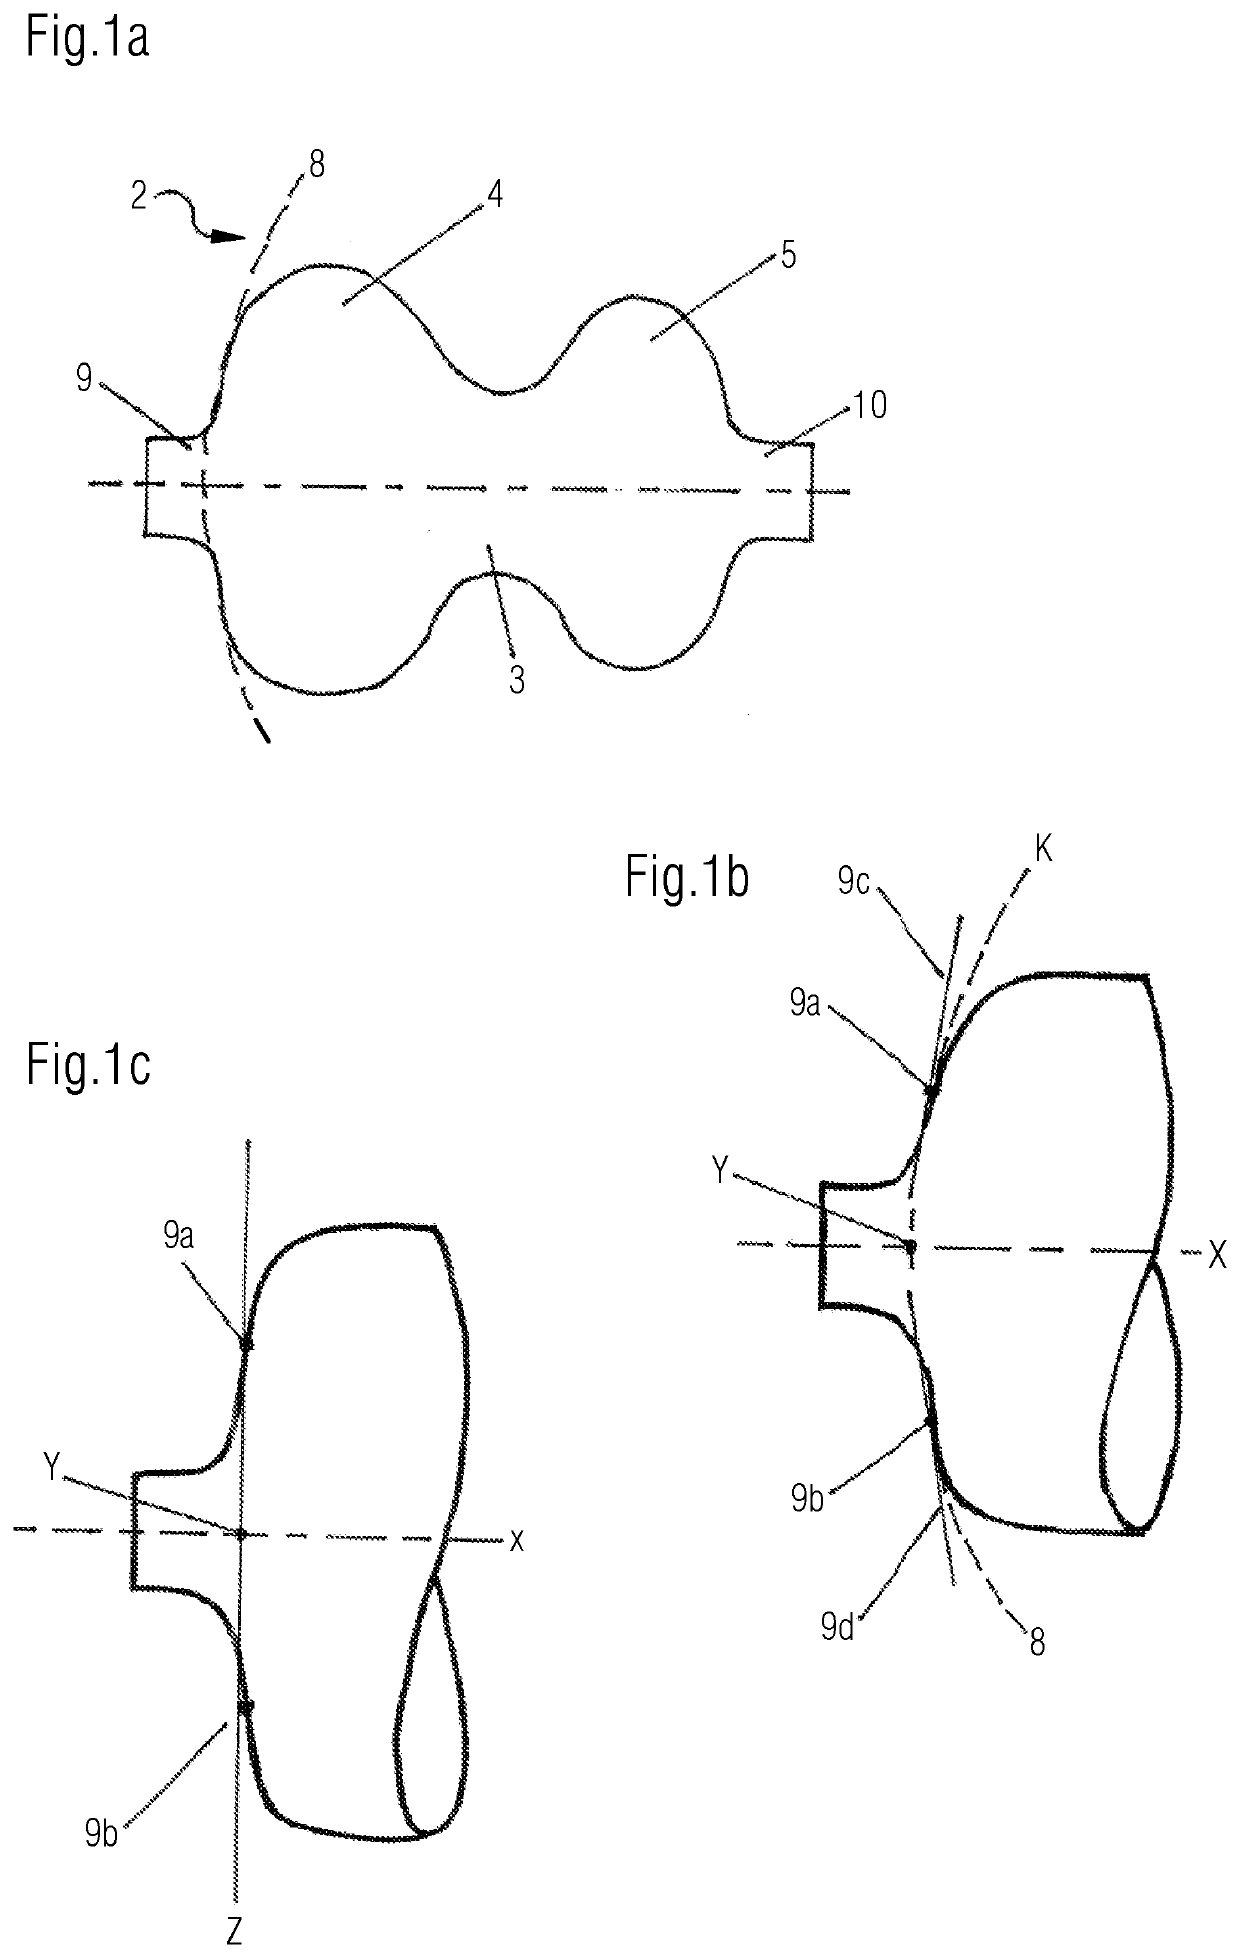 Method and device for the trans-anal drainage of stool from the rectum of a patient and/or for the trans-anal application of inflowing liquid through a catheter-like element